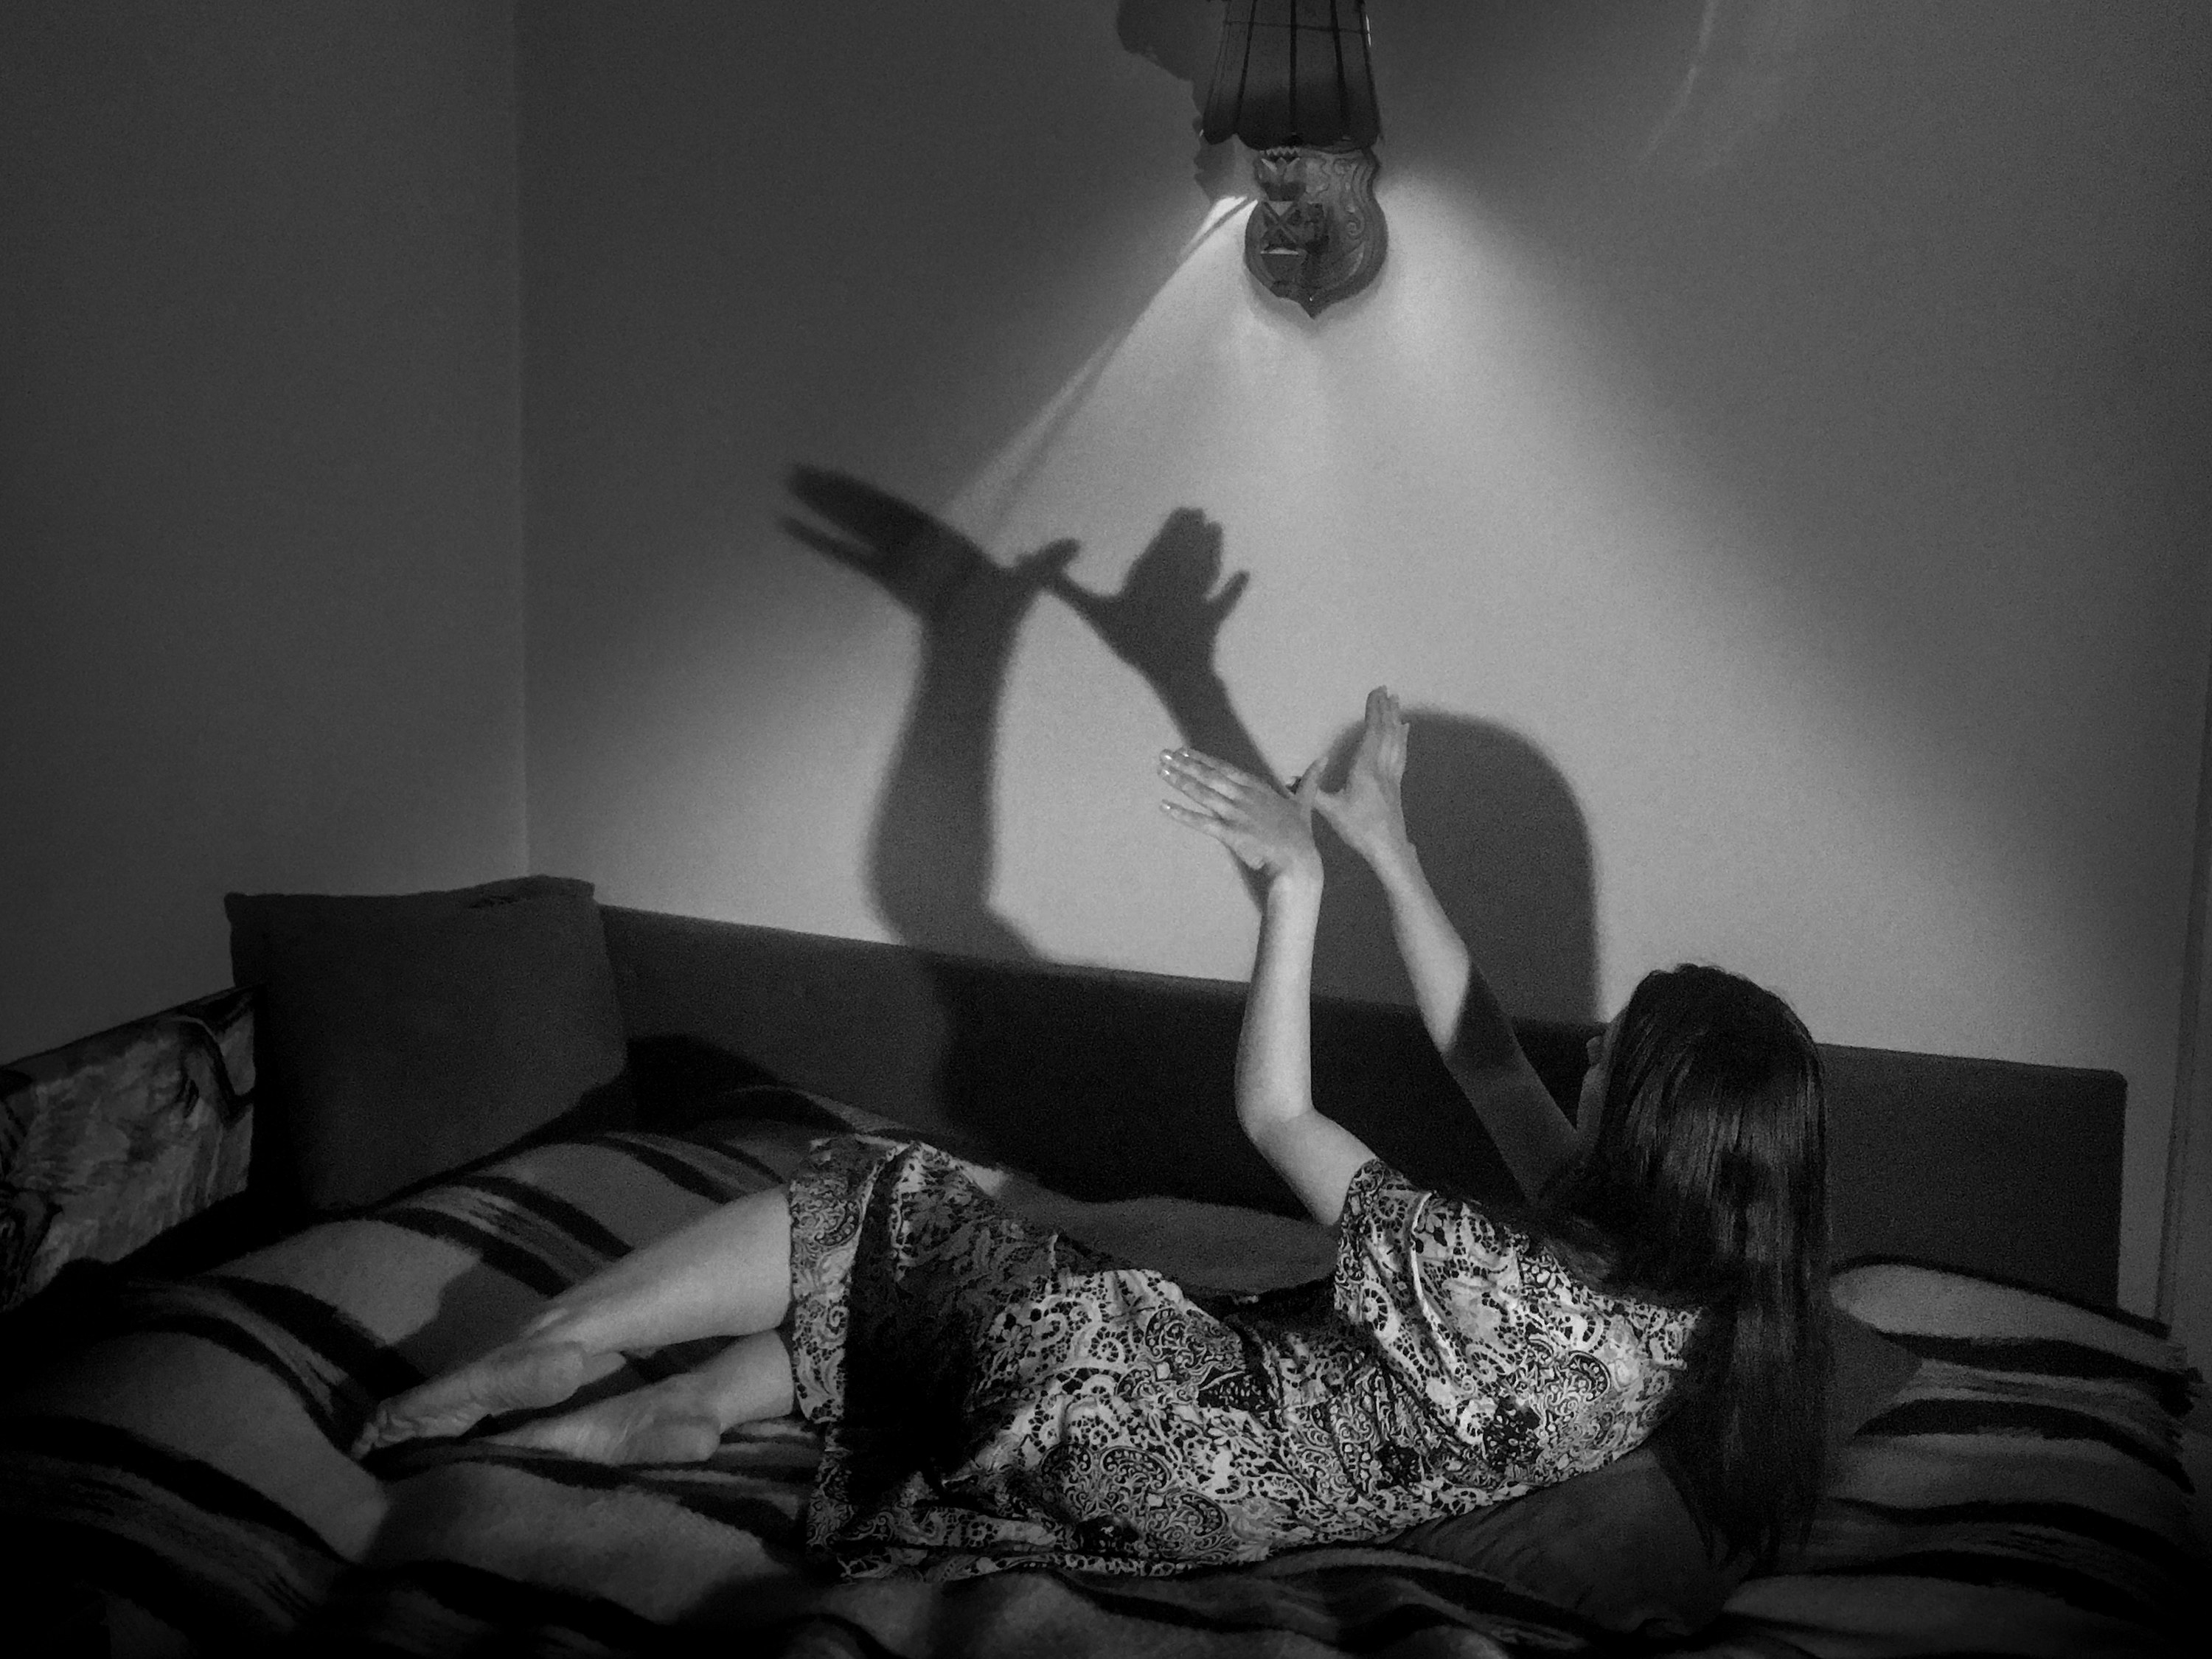 A woman makes shadow puppets of birds from her couch